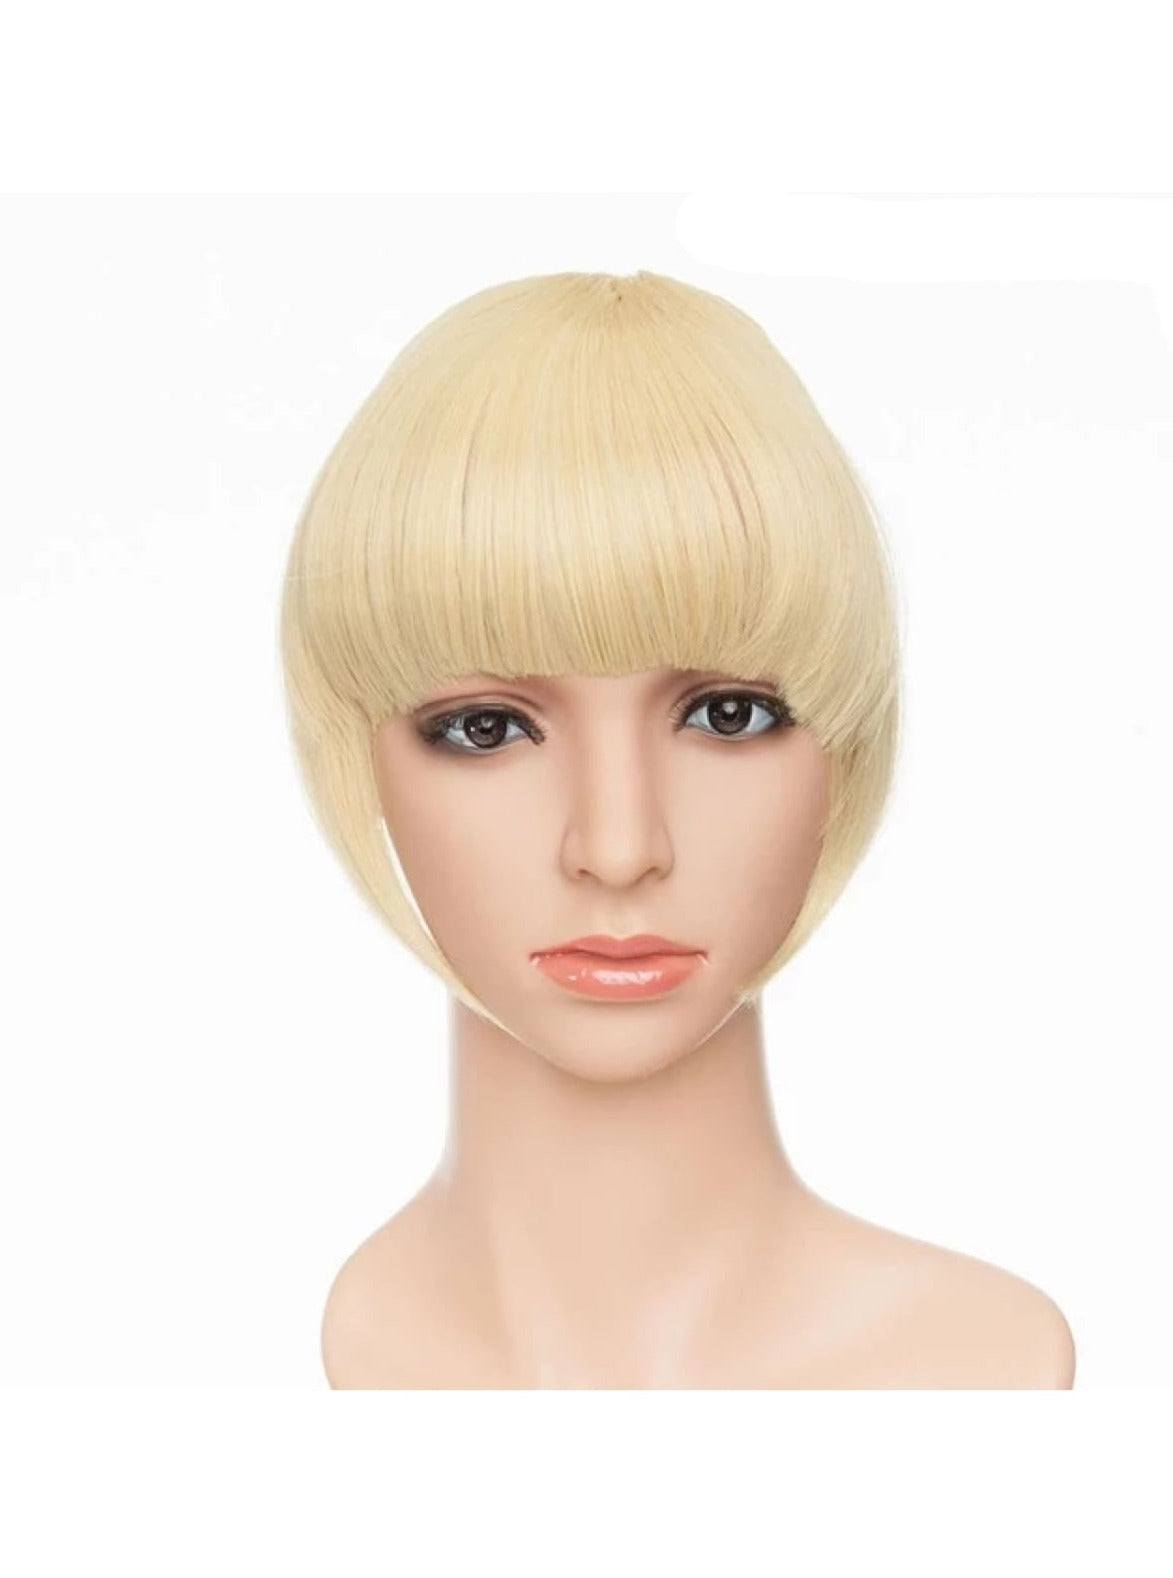 Girls Synthetic Removable Clip-On Bangs - Golden Bleach blonde / One Size - Girls Halloween Costume